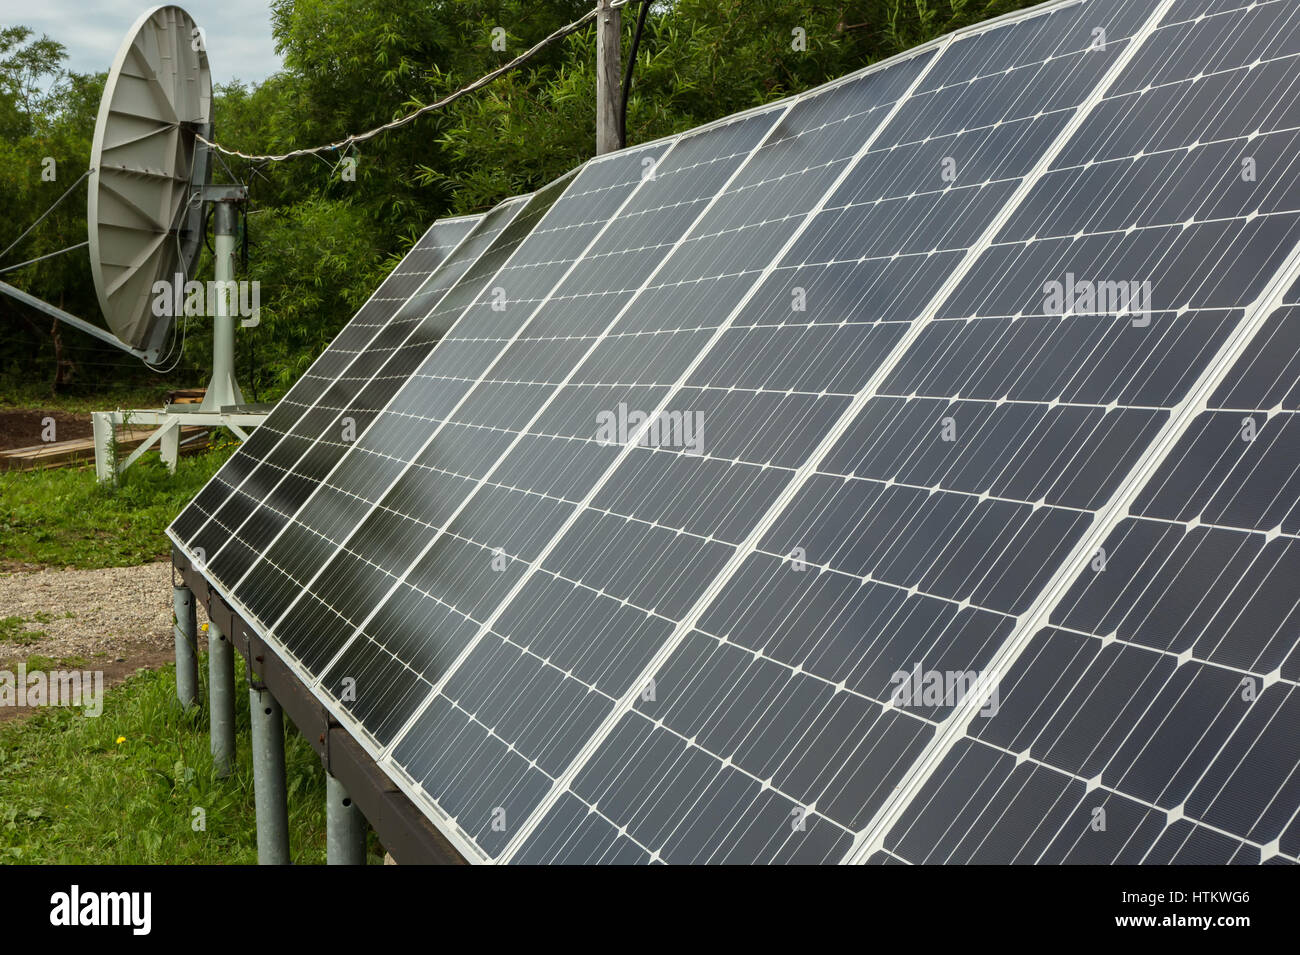 Solar panels and satellite dish for energy and communication in suburbs. Stock Photo